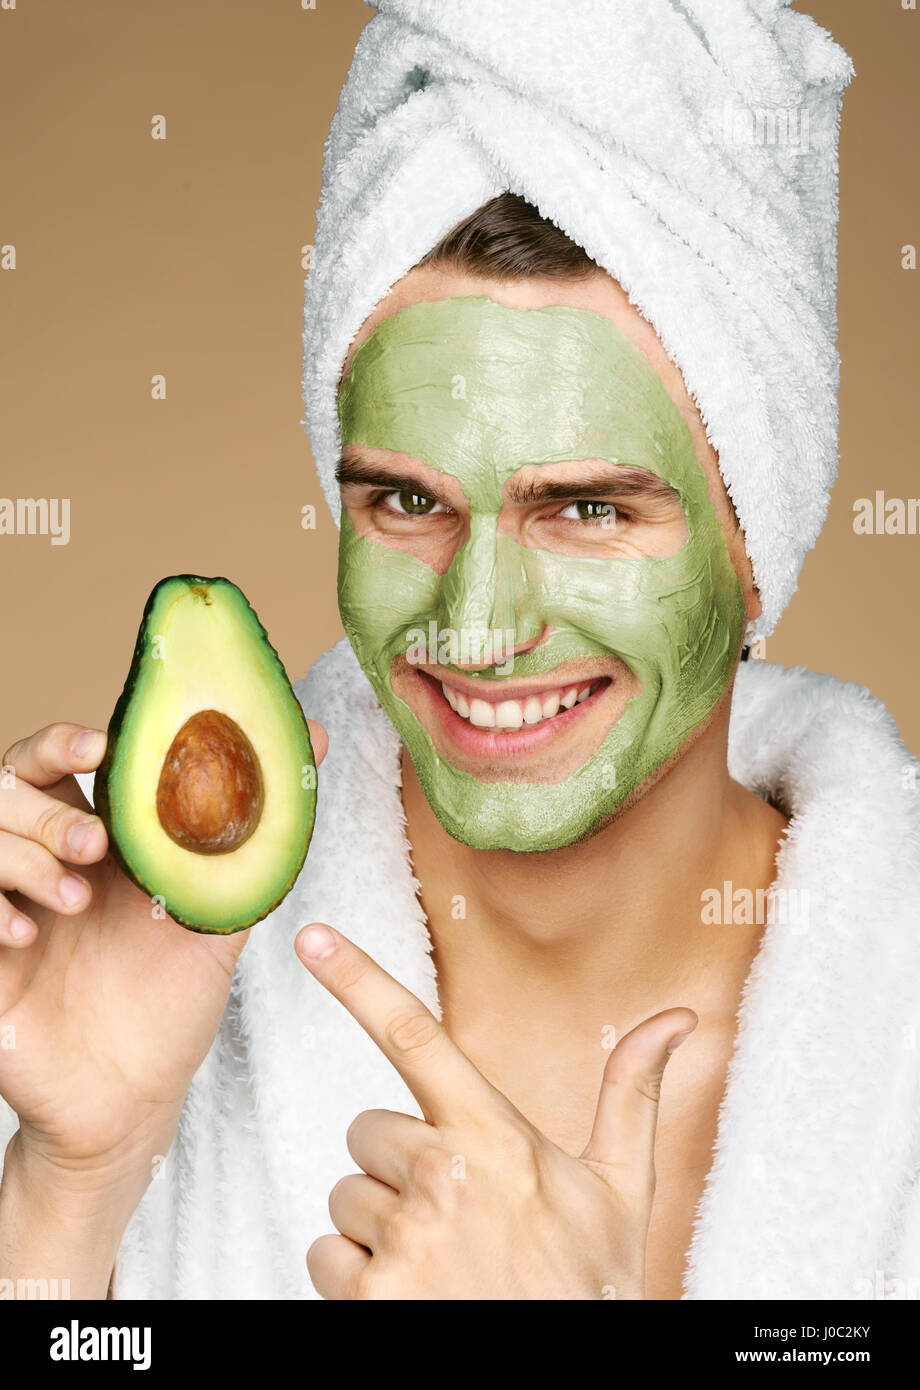 Happy smiling man with facial mask of avocado. Photo of well groomed man receiving spa treatments. Grooming himself Stock Photo